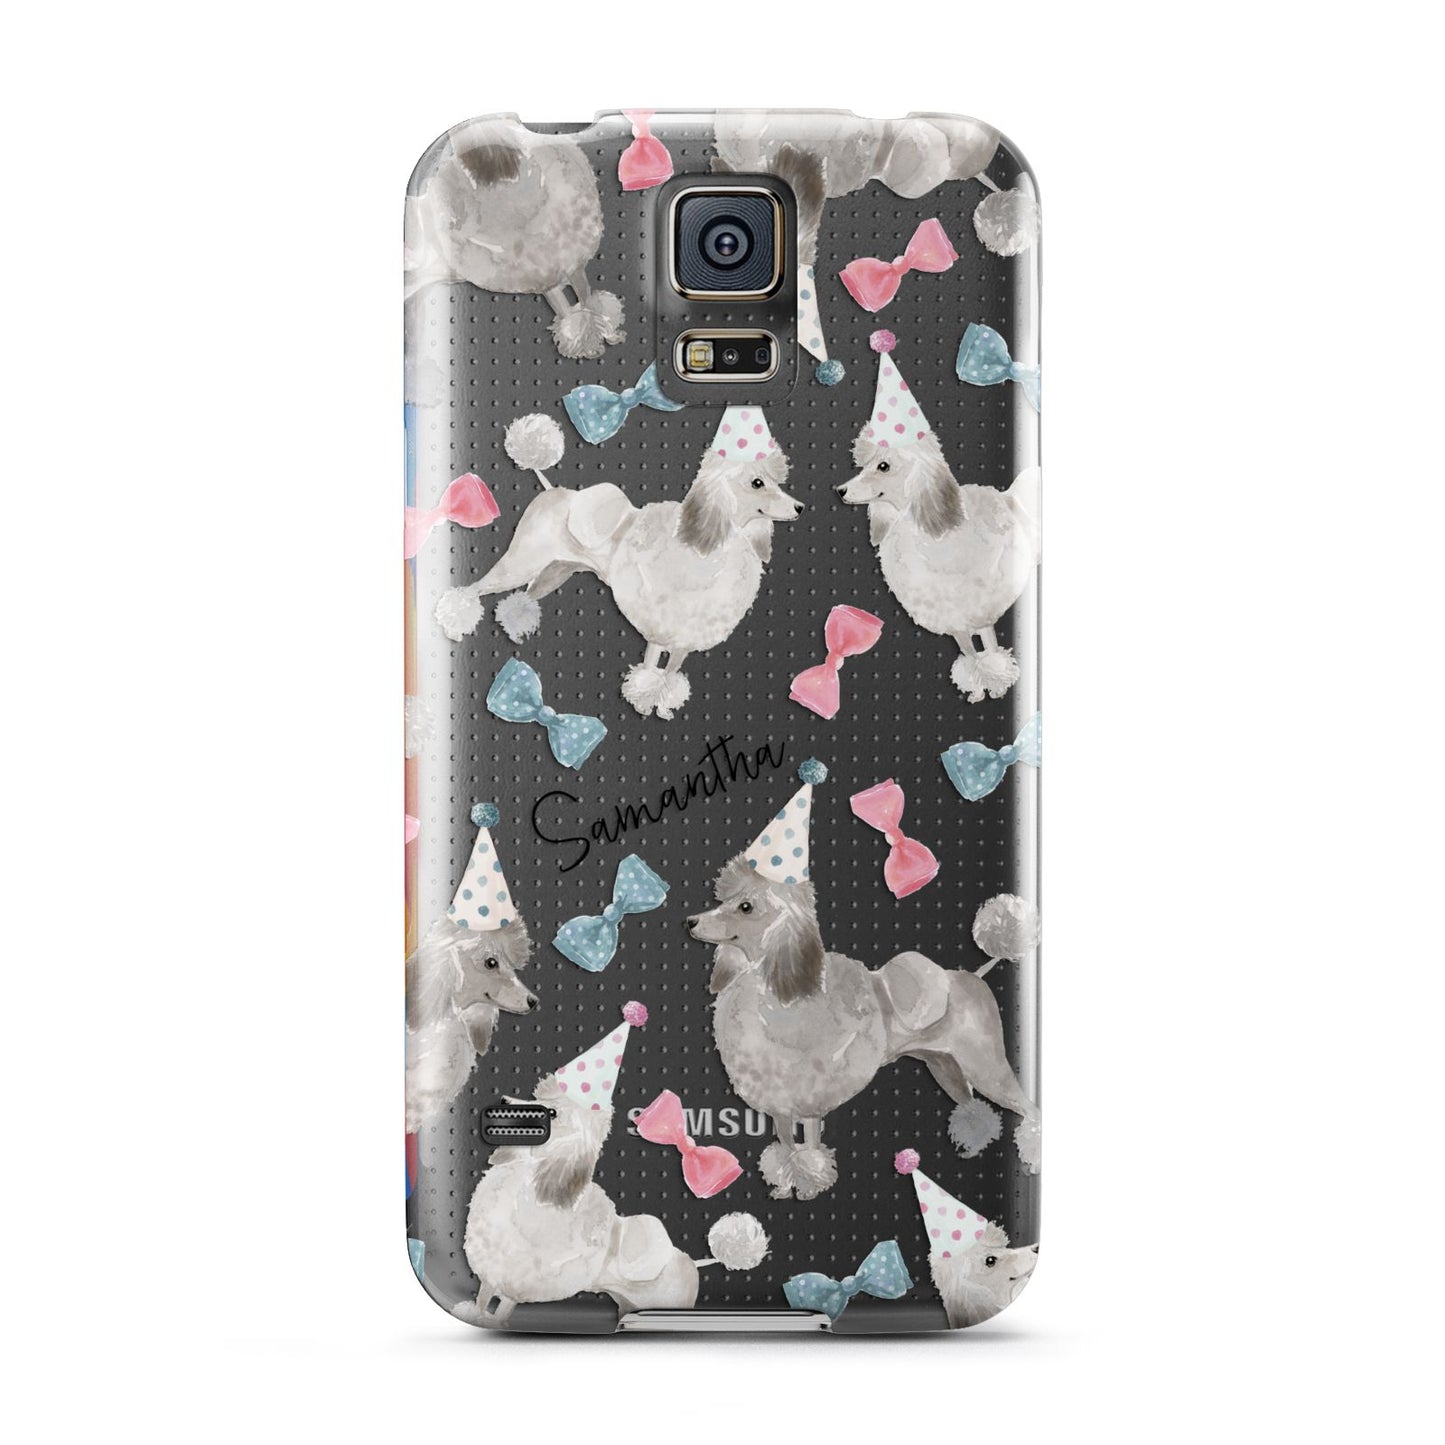 Personalised Poodle Dog Samsung Galaxy S5 Case